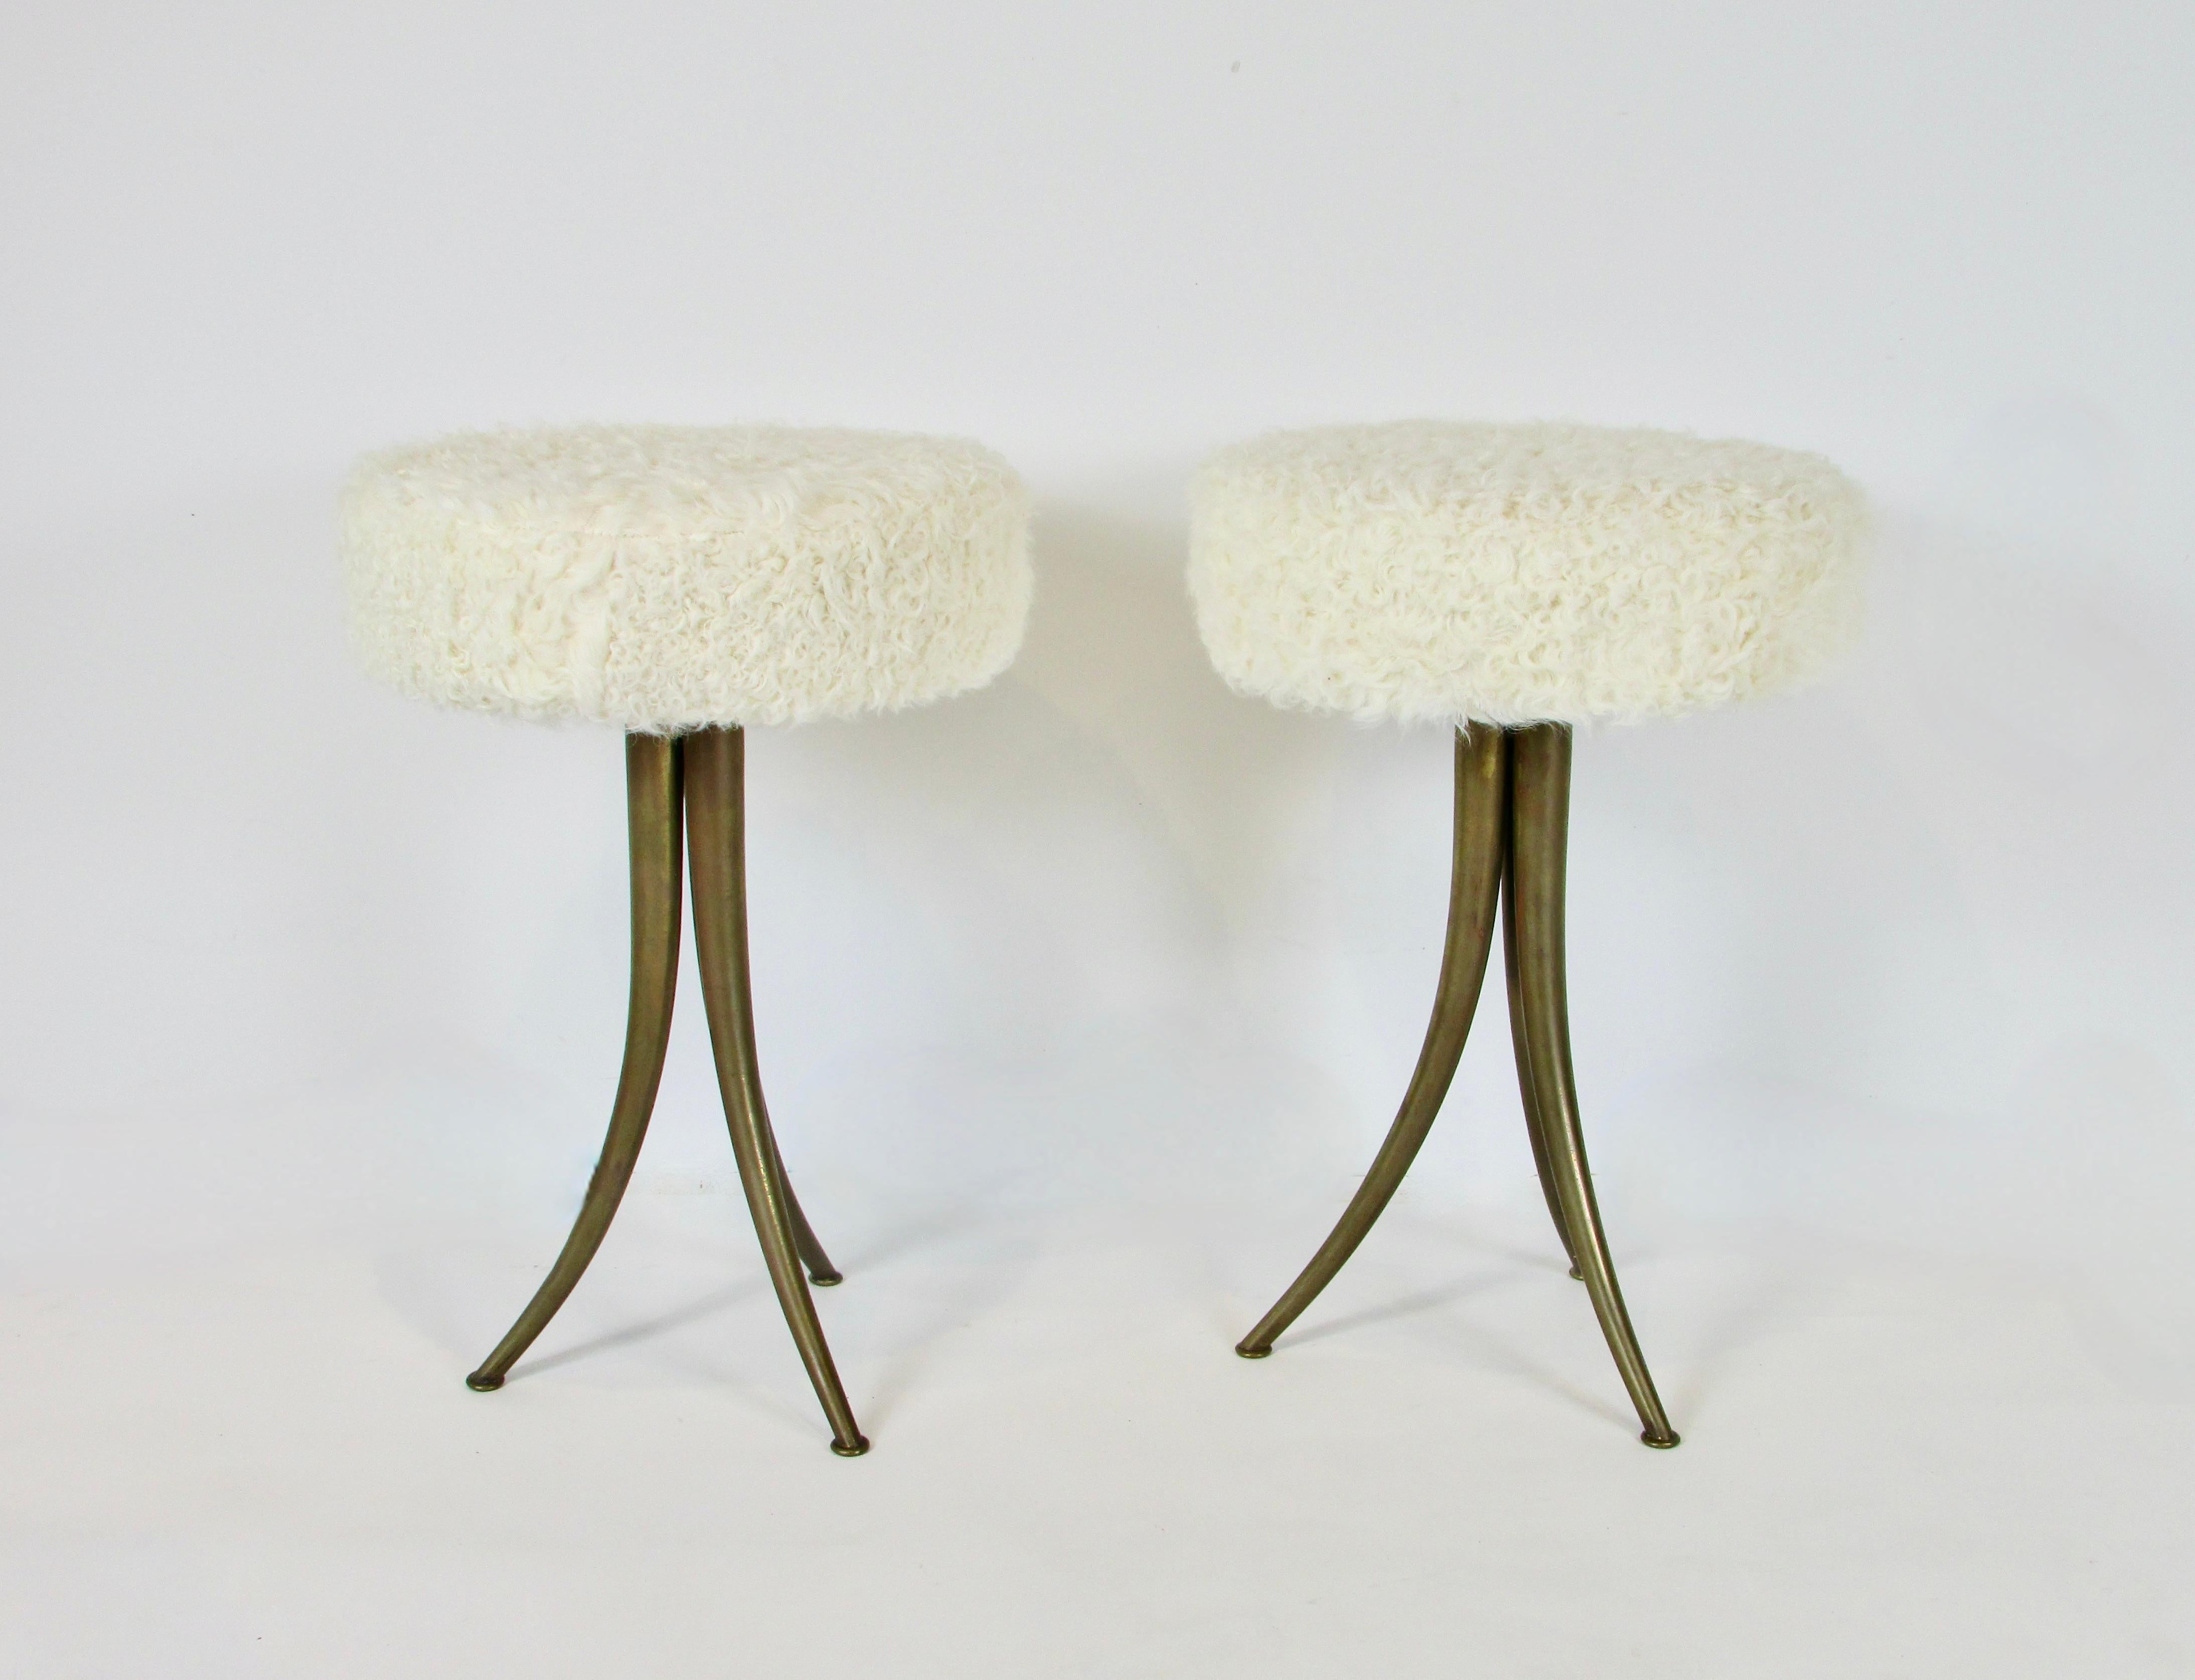 Pair of petite stools marked Made in Italy . Three legged stool with each leg tapering down to nickel size glides on the floor . Sensually curved tapering legs support Lambskin covered cushions . One stool retains water decal label . Seats have been